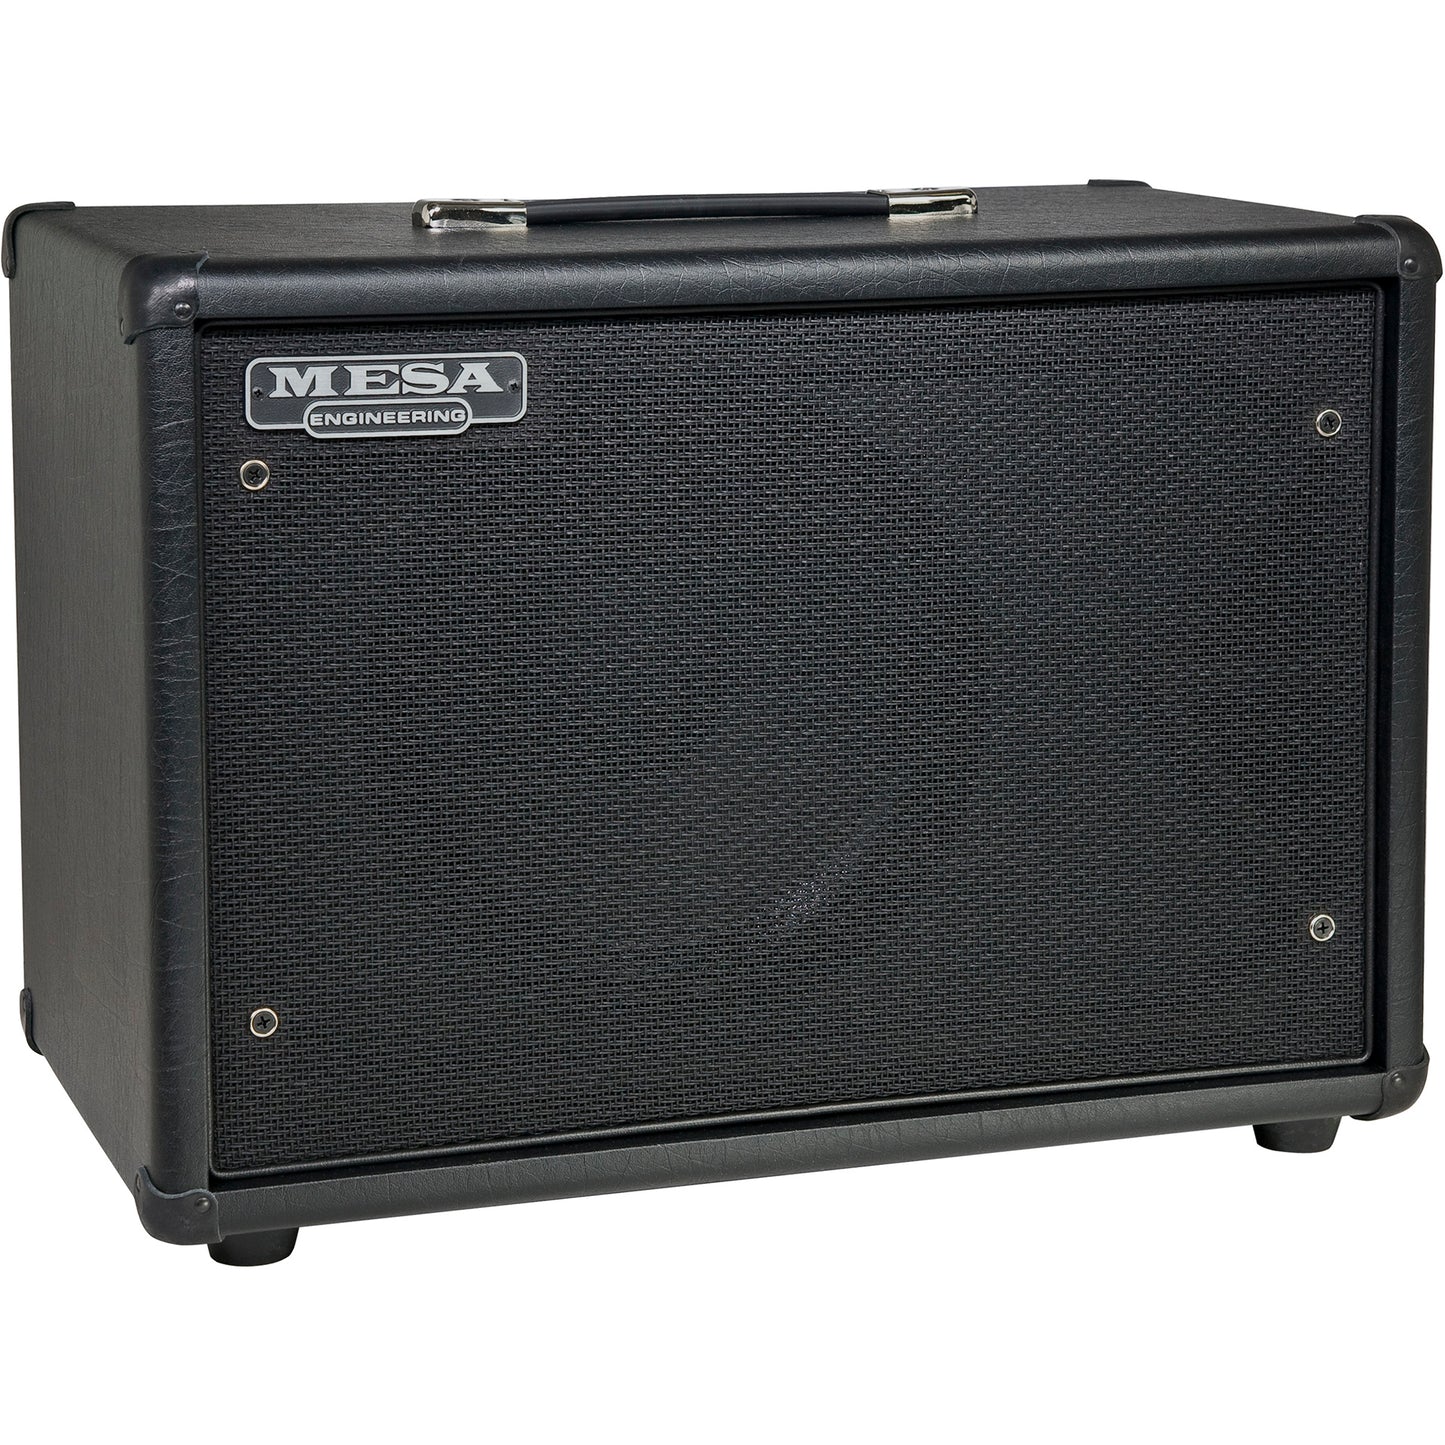 Mesa Boogie Widebody 1x12” Closed Back Cabinet with Celestion 90